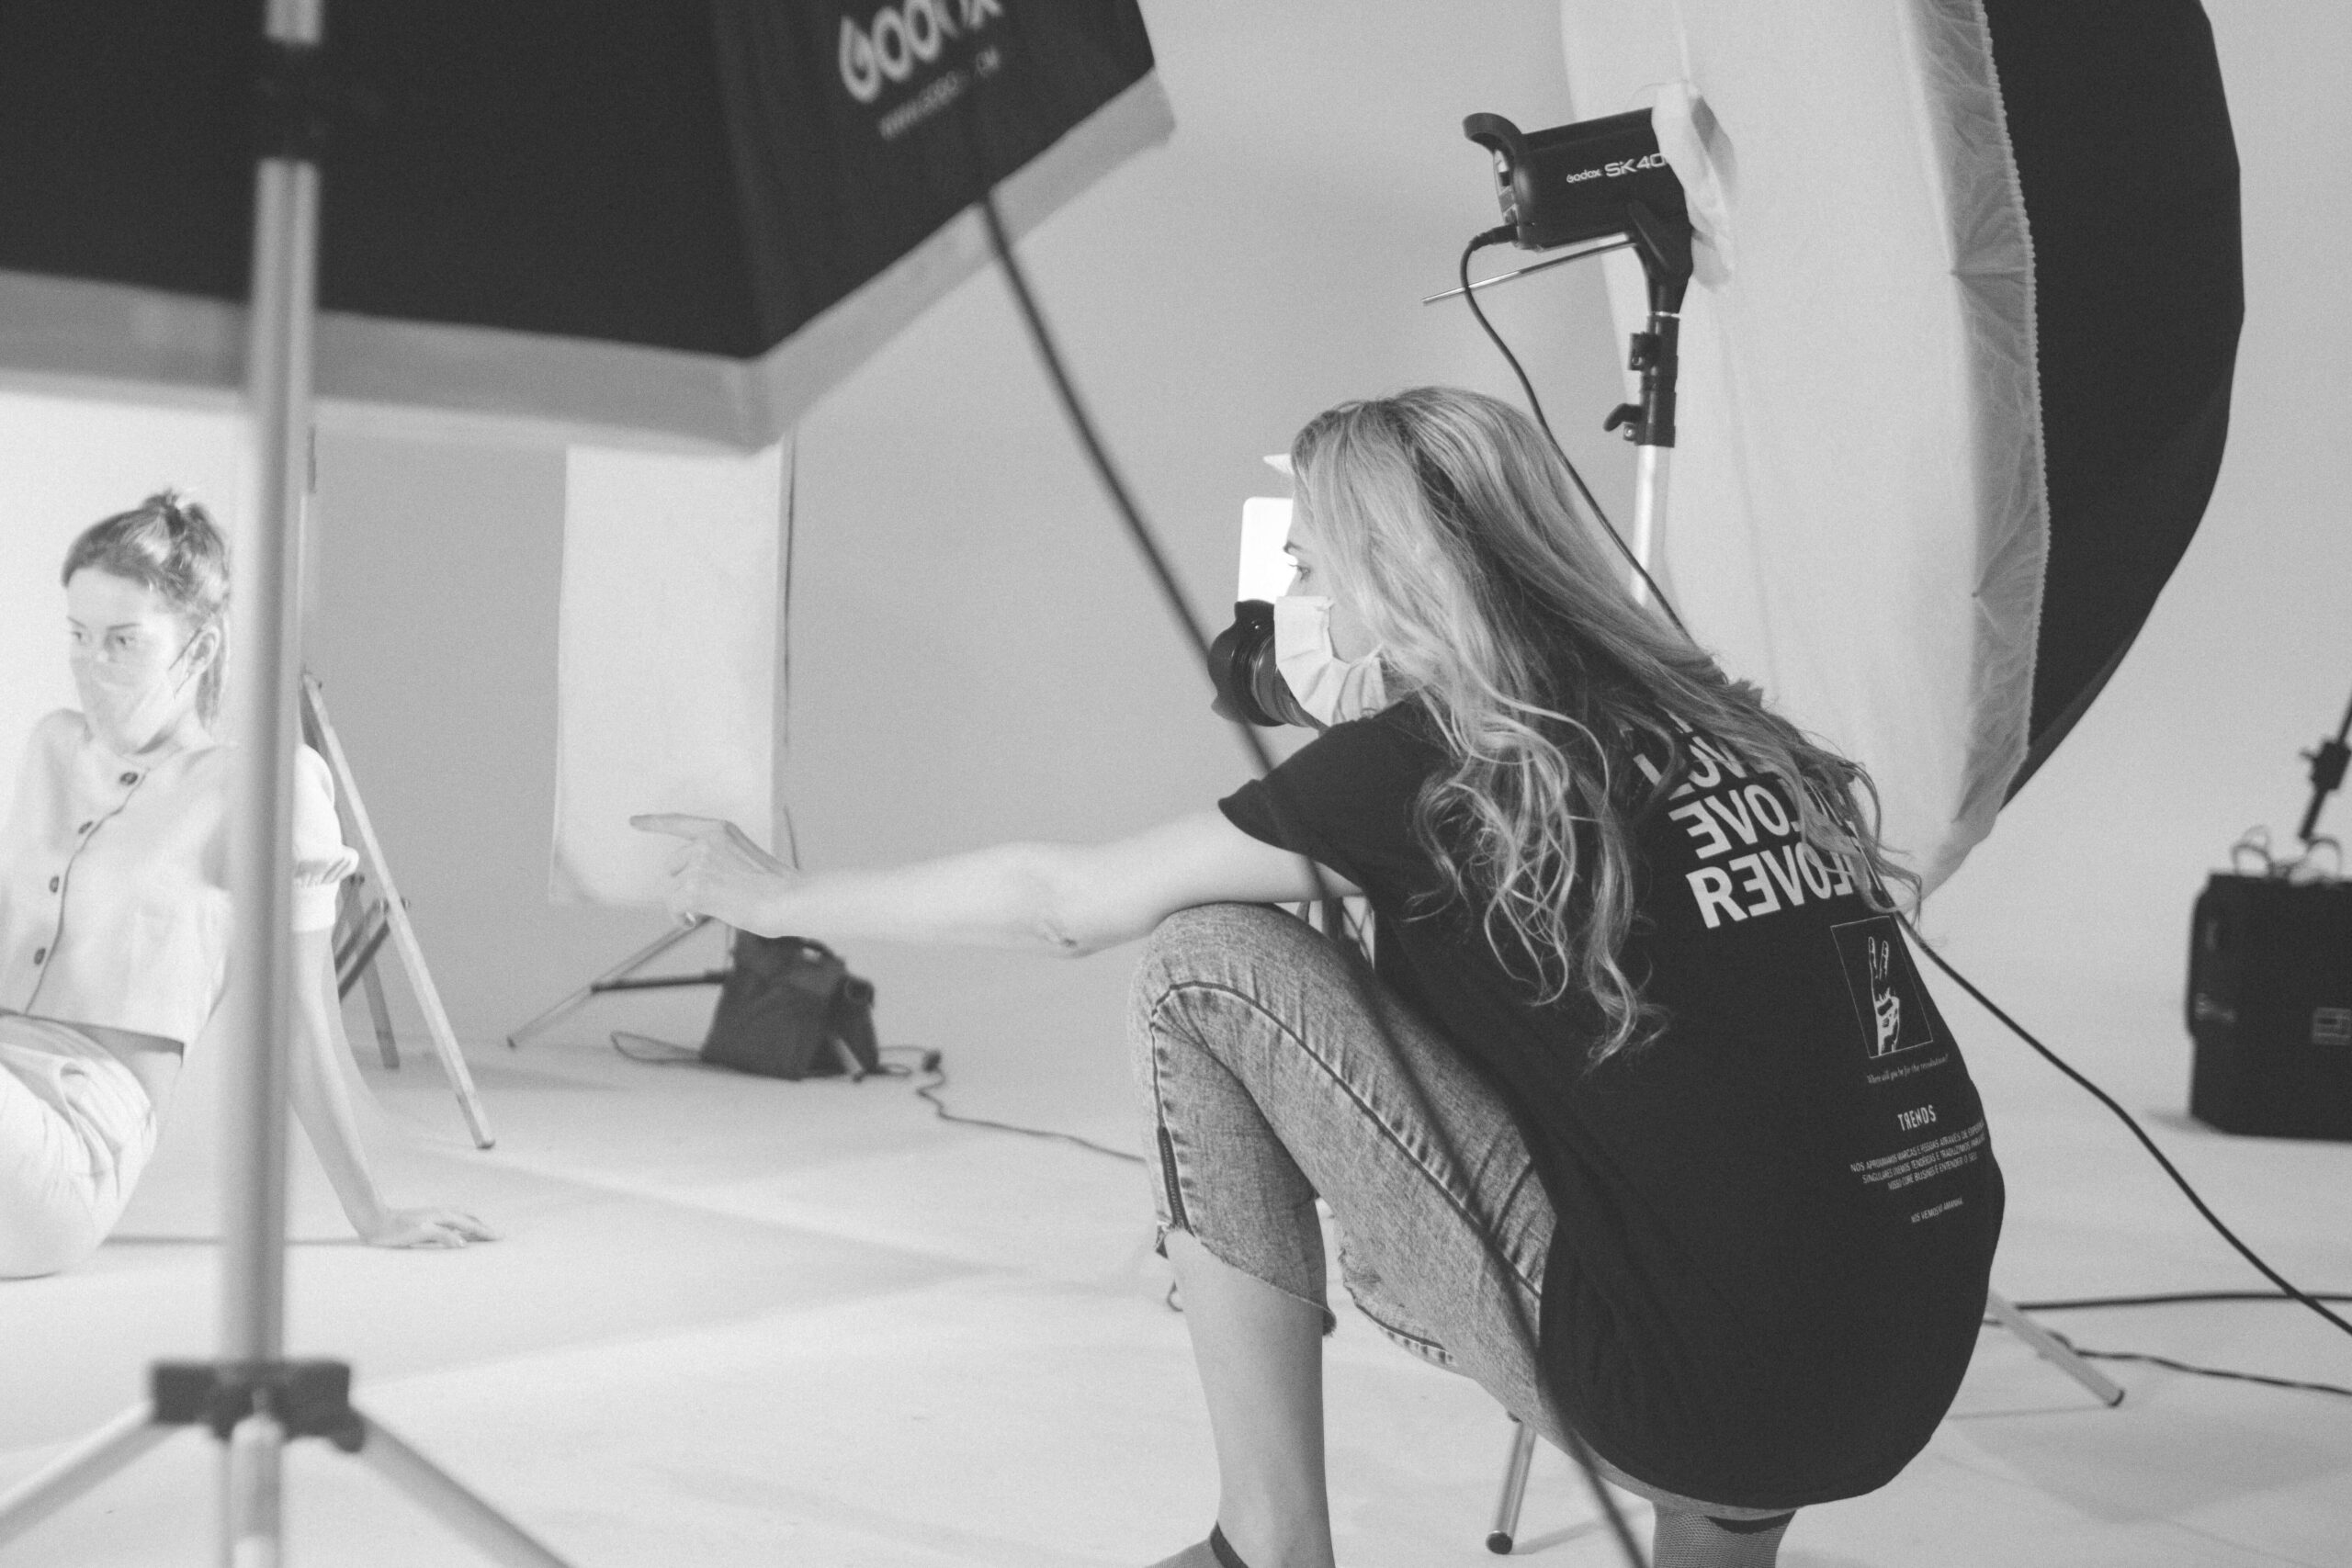 A woman squatting to capture a photo in a studio